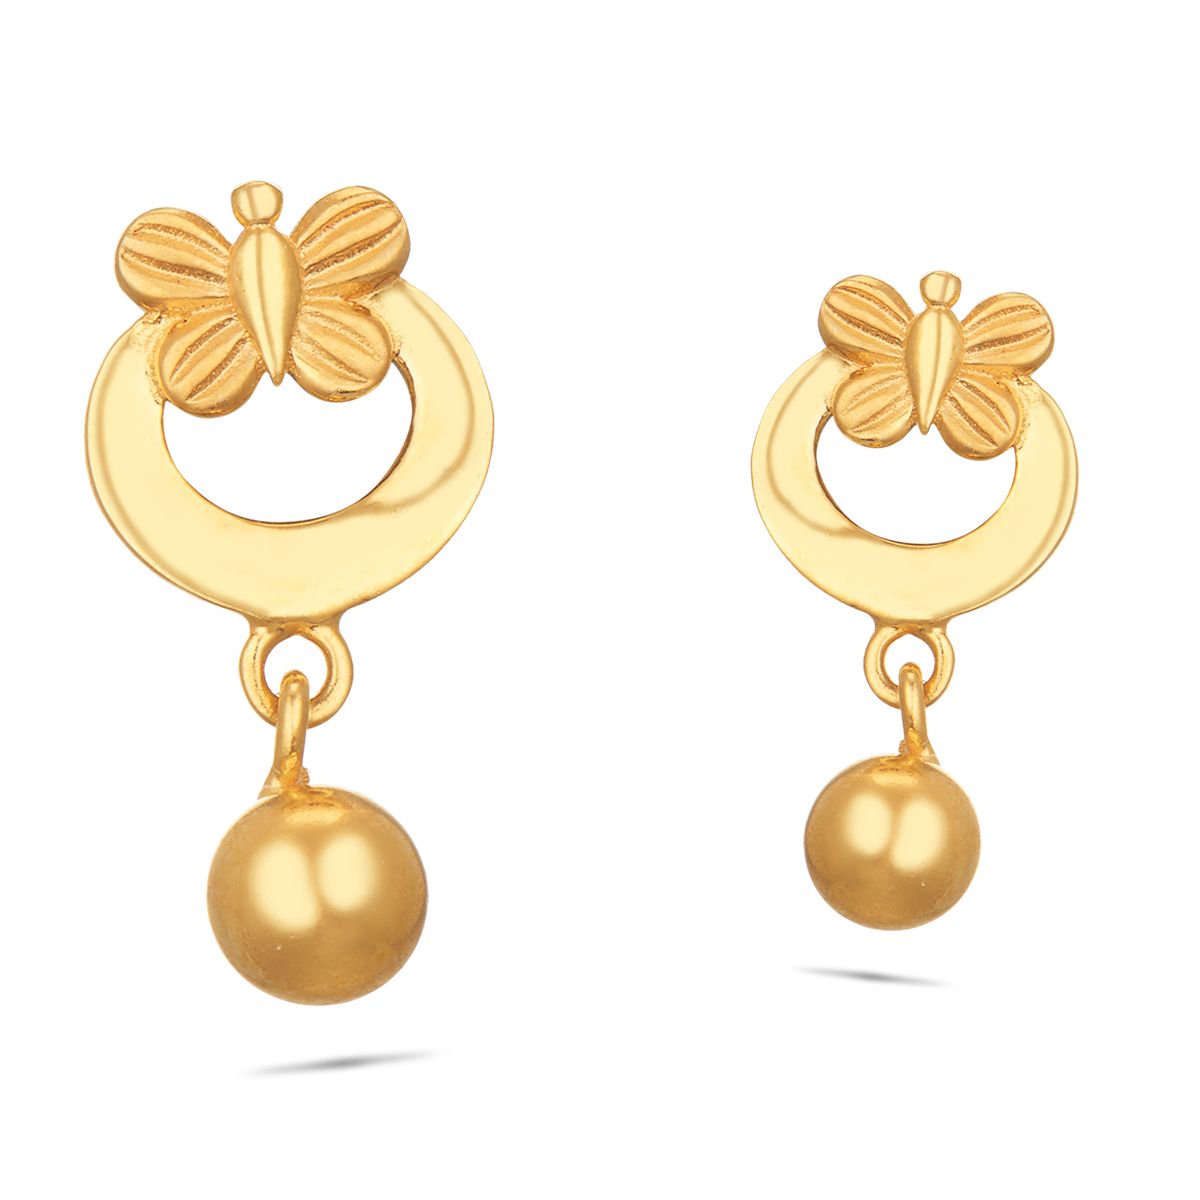 simple-earrings-for-kids-and-adults2.JPG (600×464) | Gold earrings for kids,  Gold earrings designs, Gold jewellery design necklaces